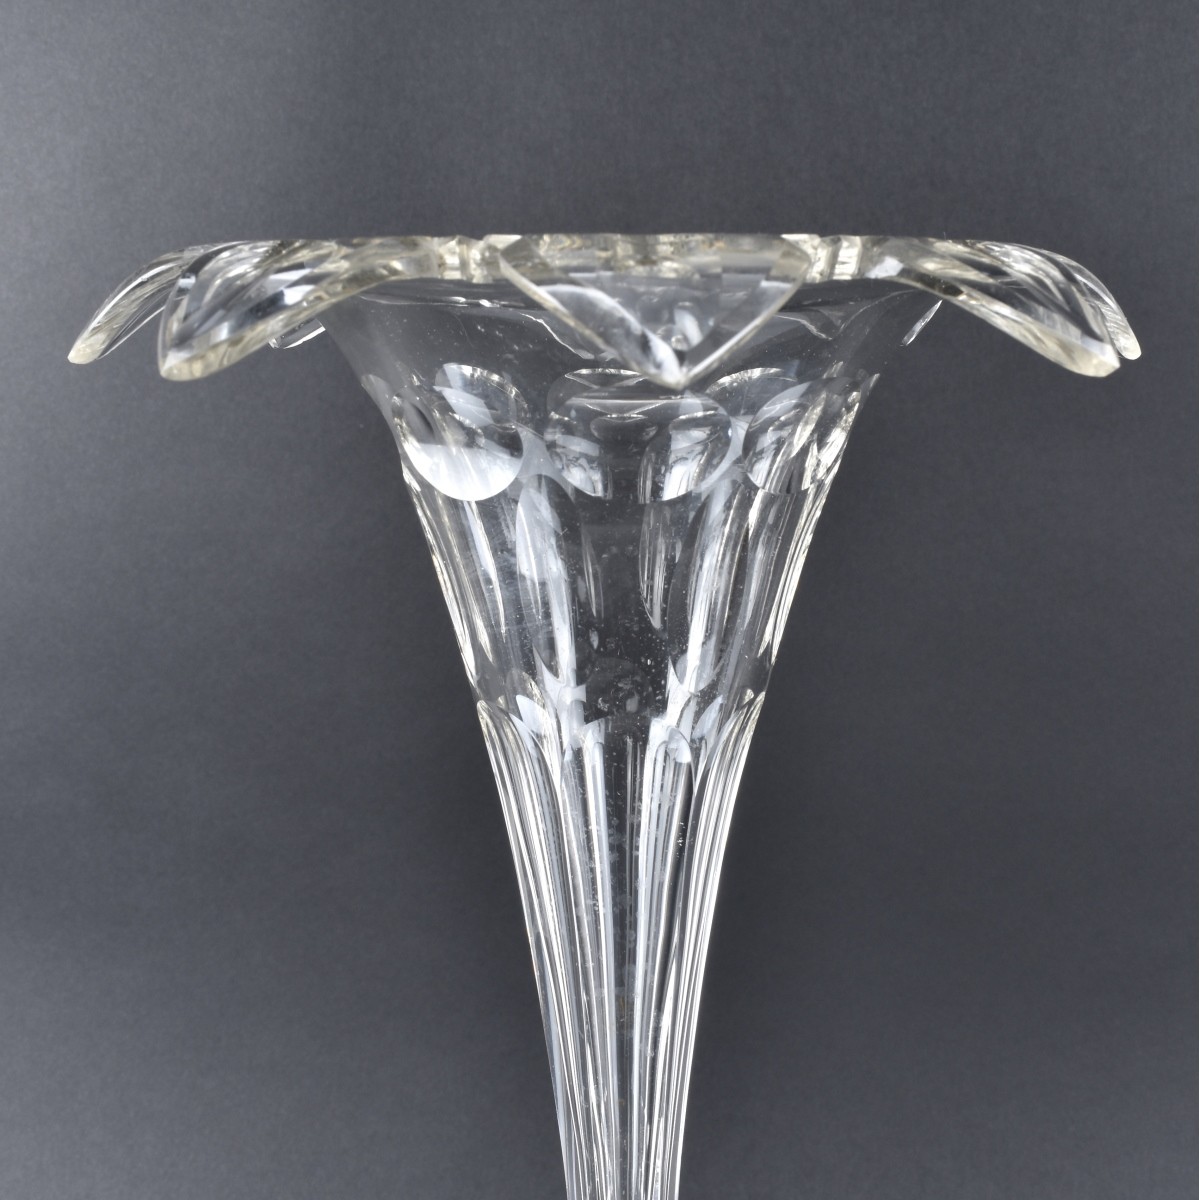 English Silver & Glass Epergne